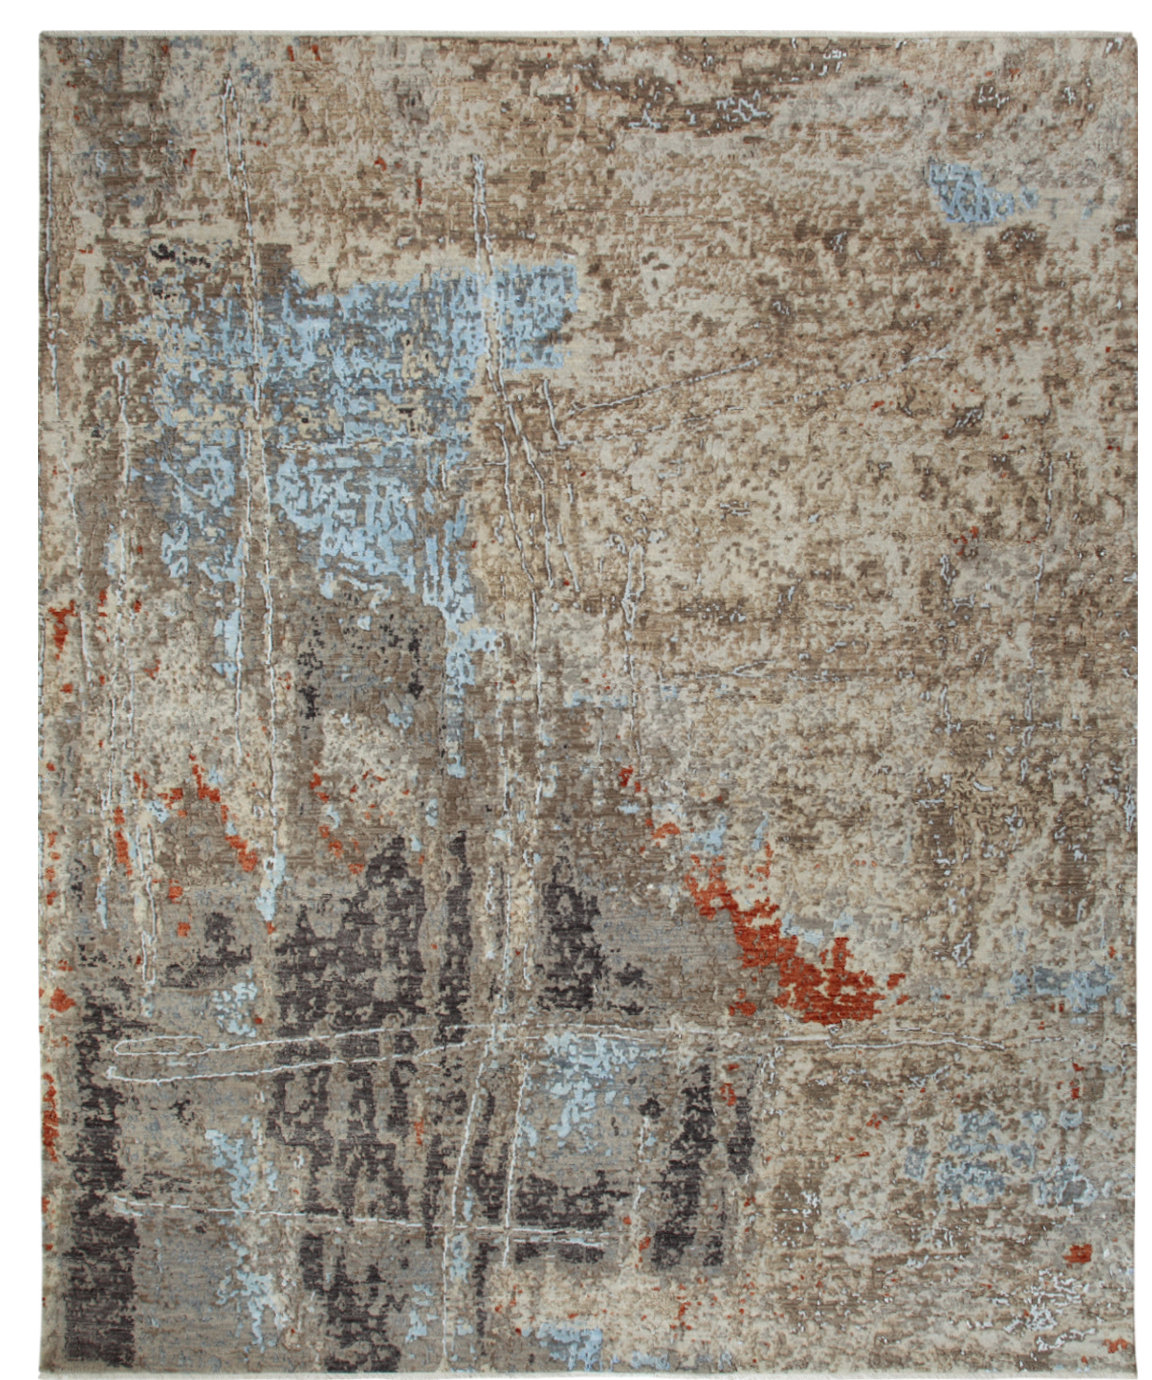 Beige 8' x 10' Solo Rugs Kiara Contemporary Abstract Hand-Knotted Indoor Area Rug 